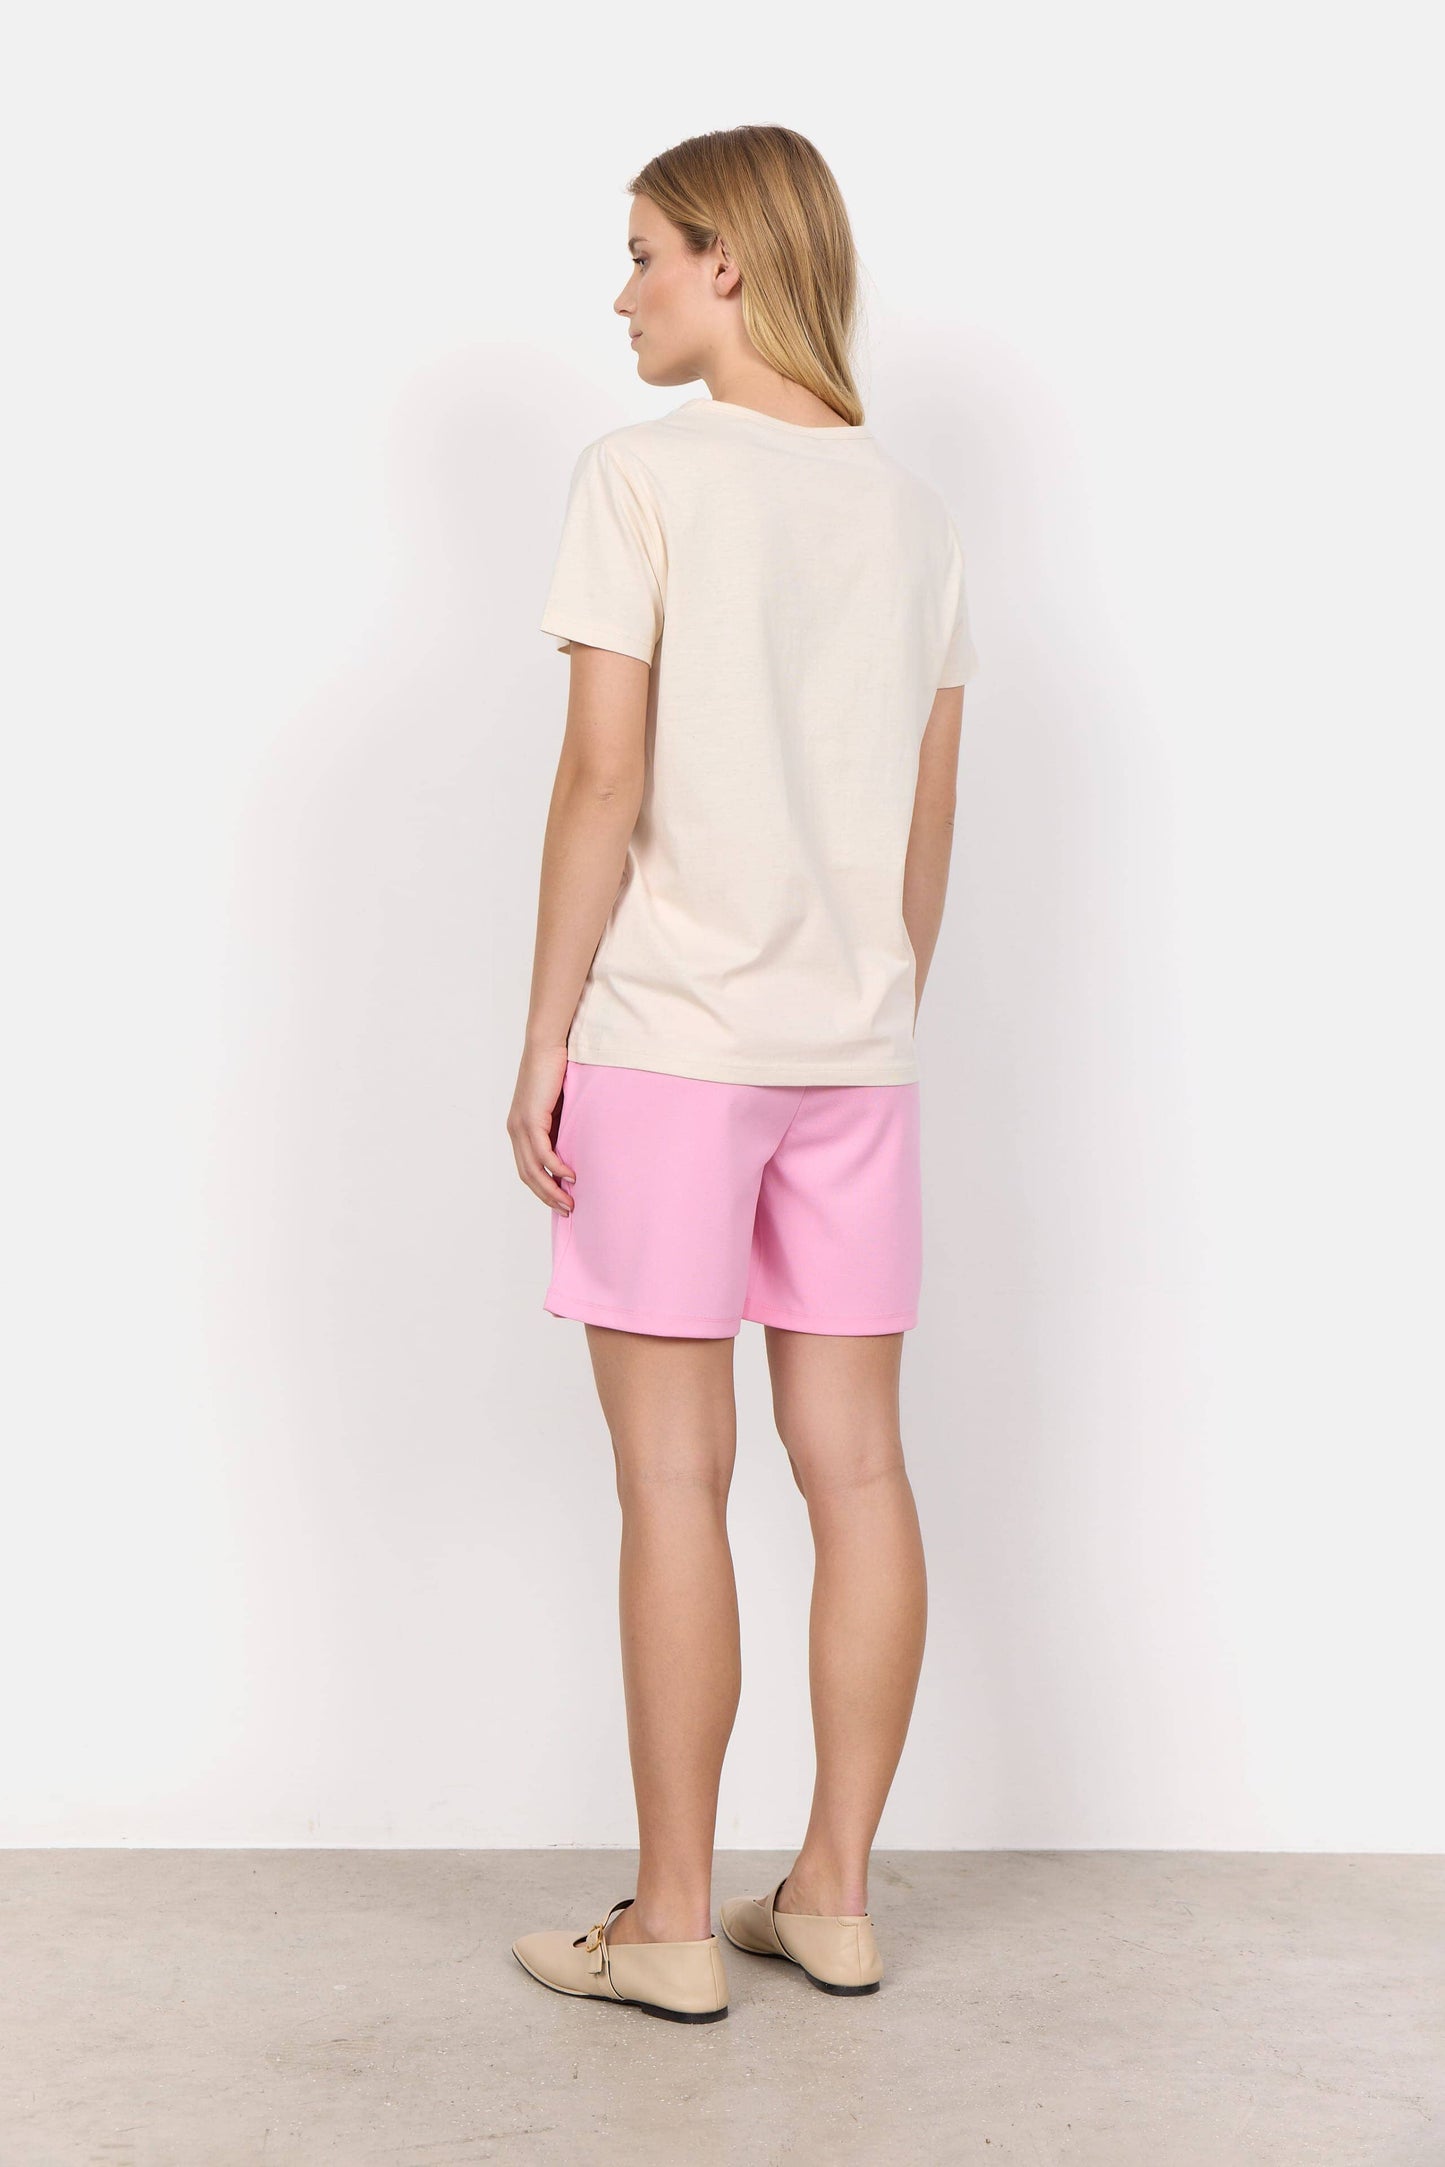 Derby T-Shirt in Dusty Clay T-Shirt Soyaconcept 